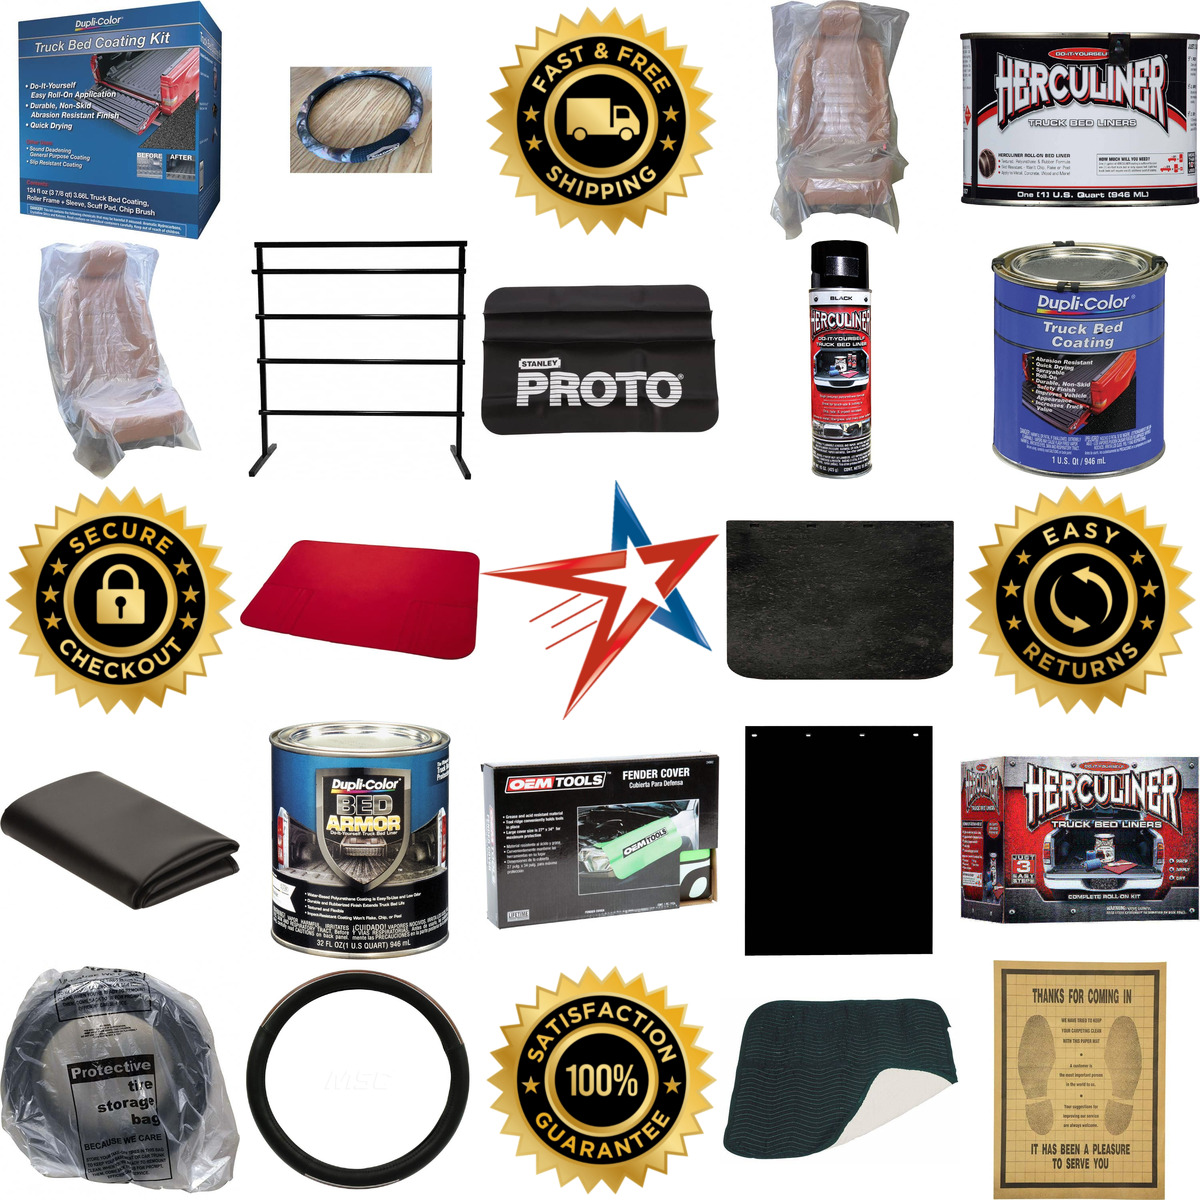 A selection of Vehicle Dirt and Mud Protection products on GoVets